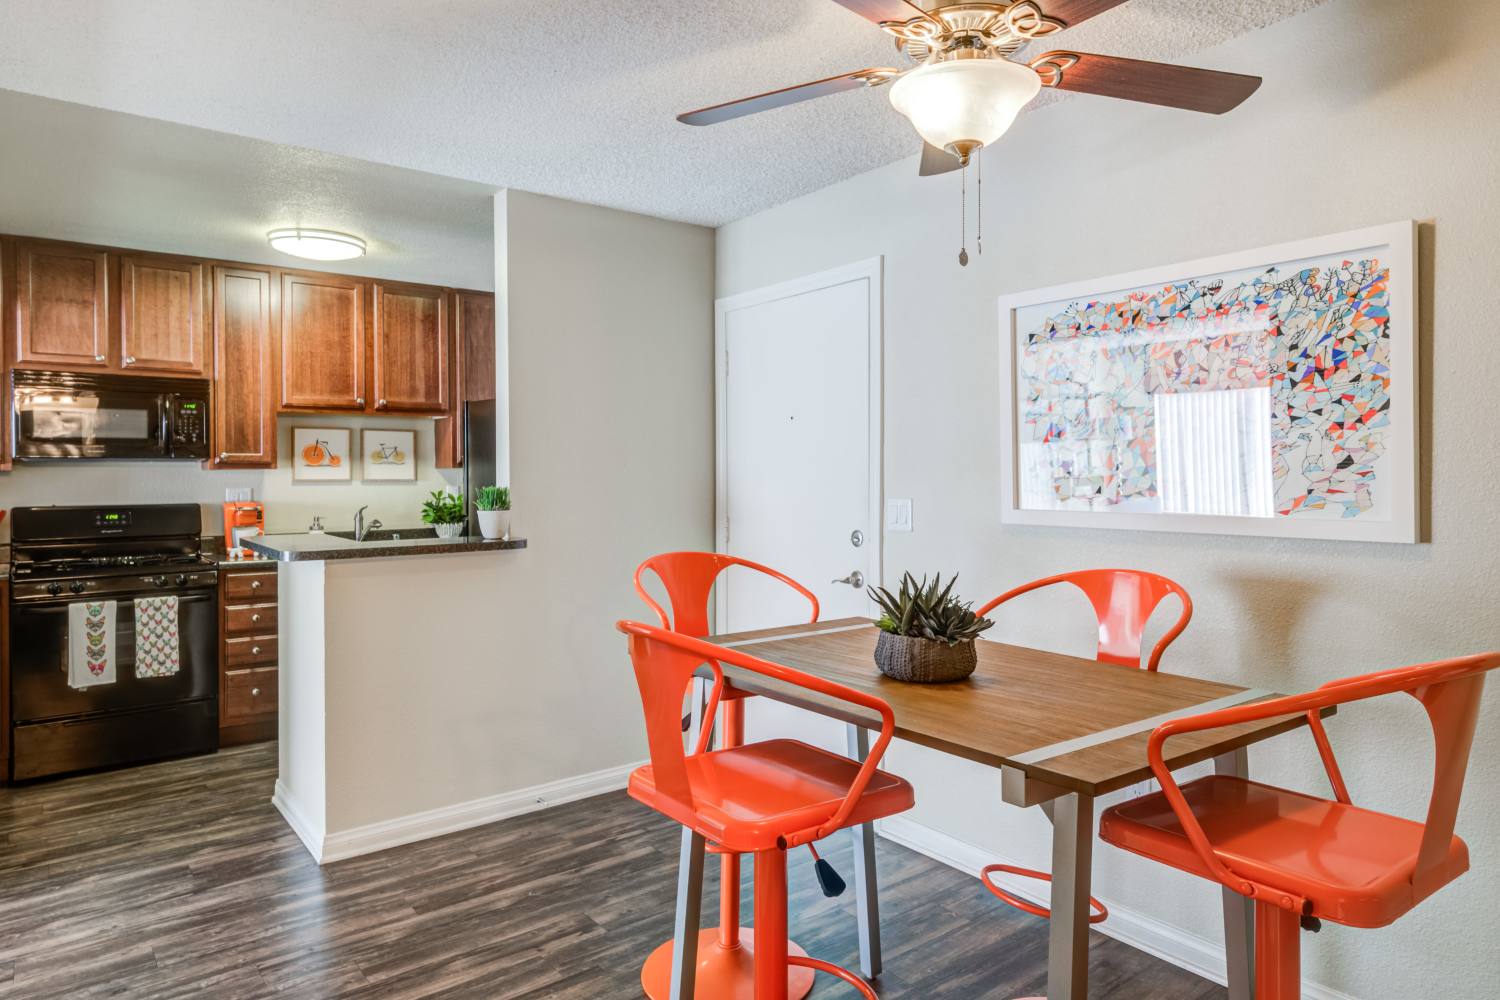 Well appointed kitchen at UCA Apartment Homes in Fullerton, California